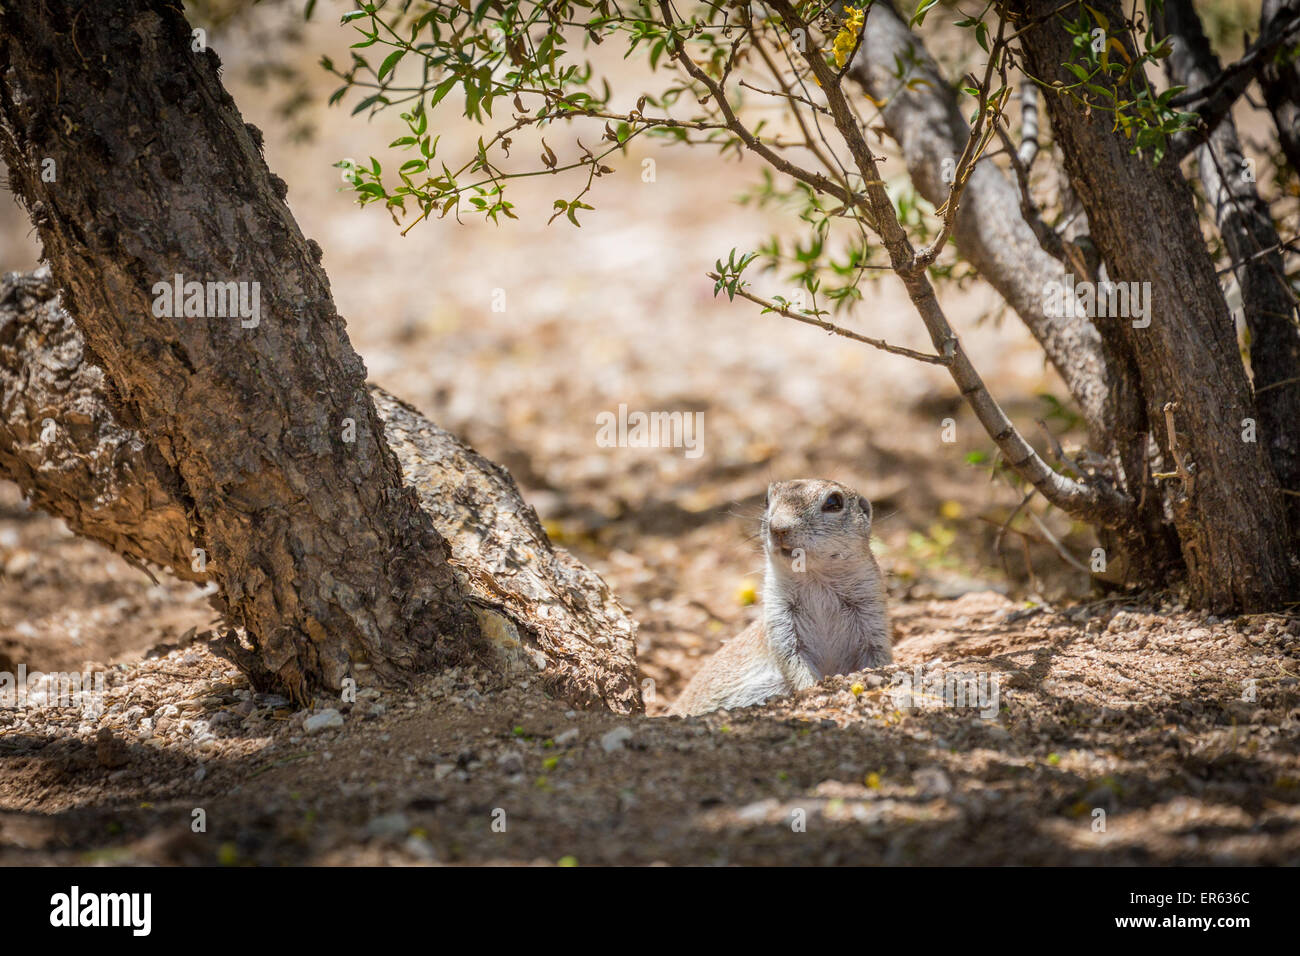 Ground Squirrel (Xerina sp.) peeping out from hole in the ground, Arizona, USA Stock Photo